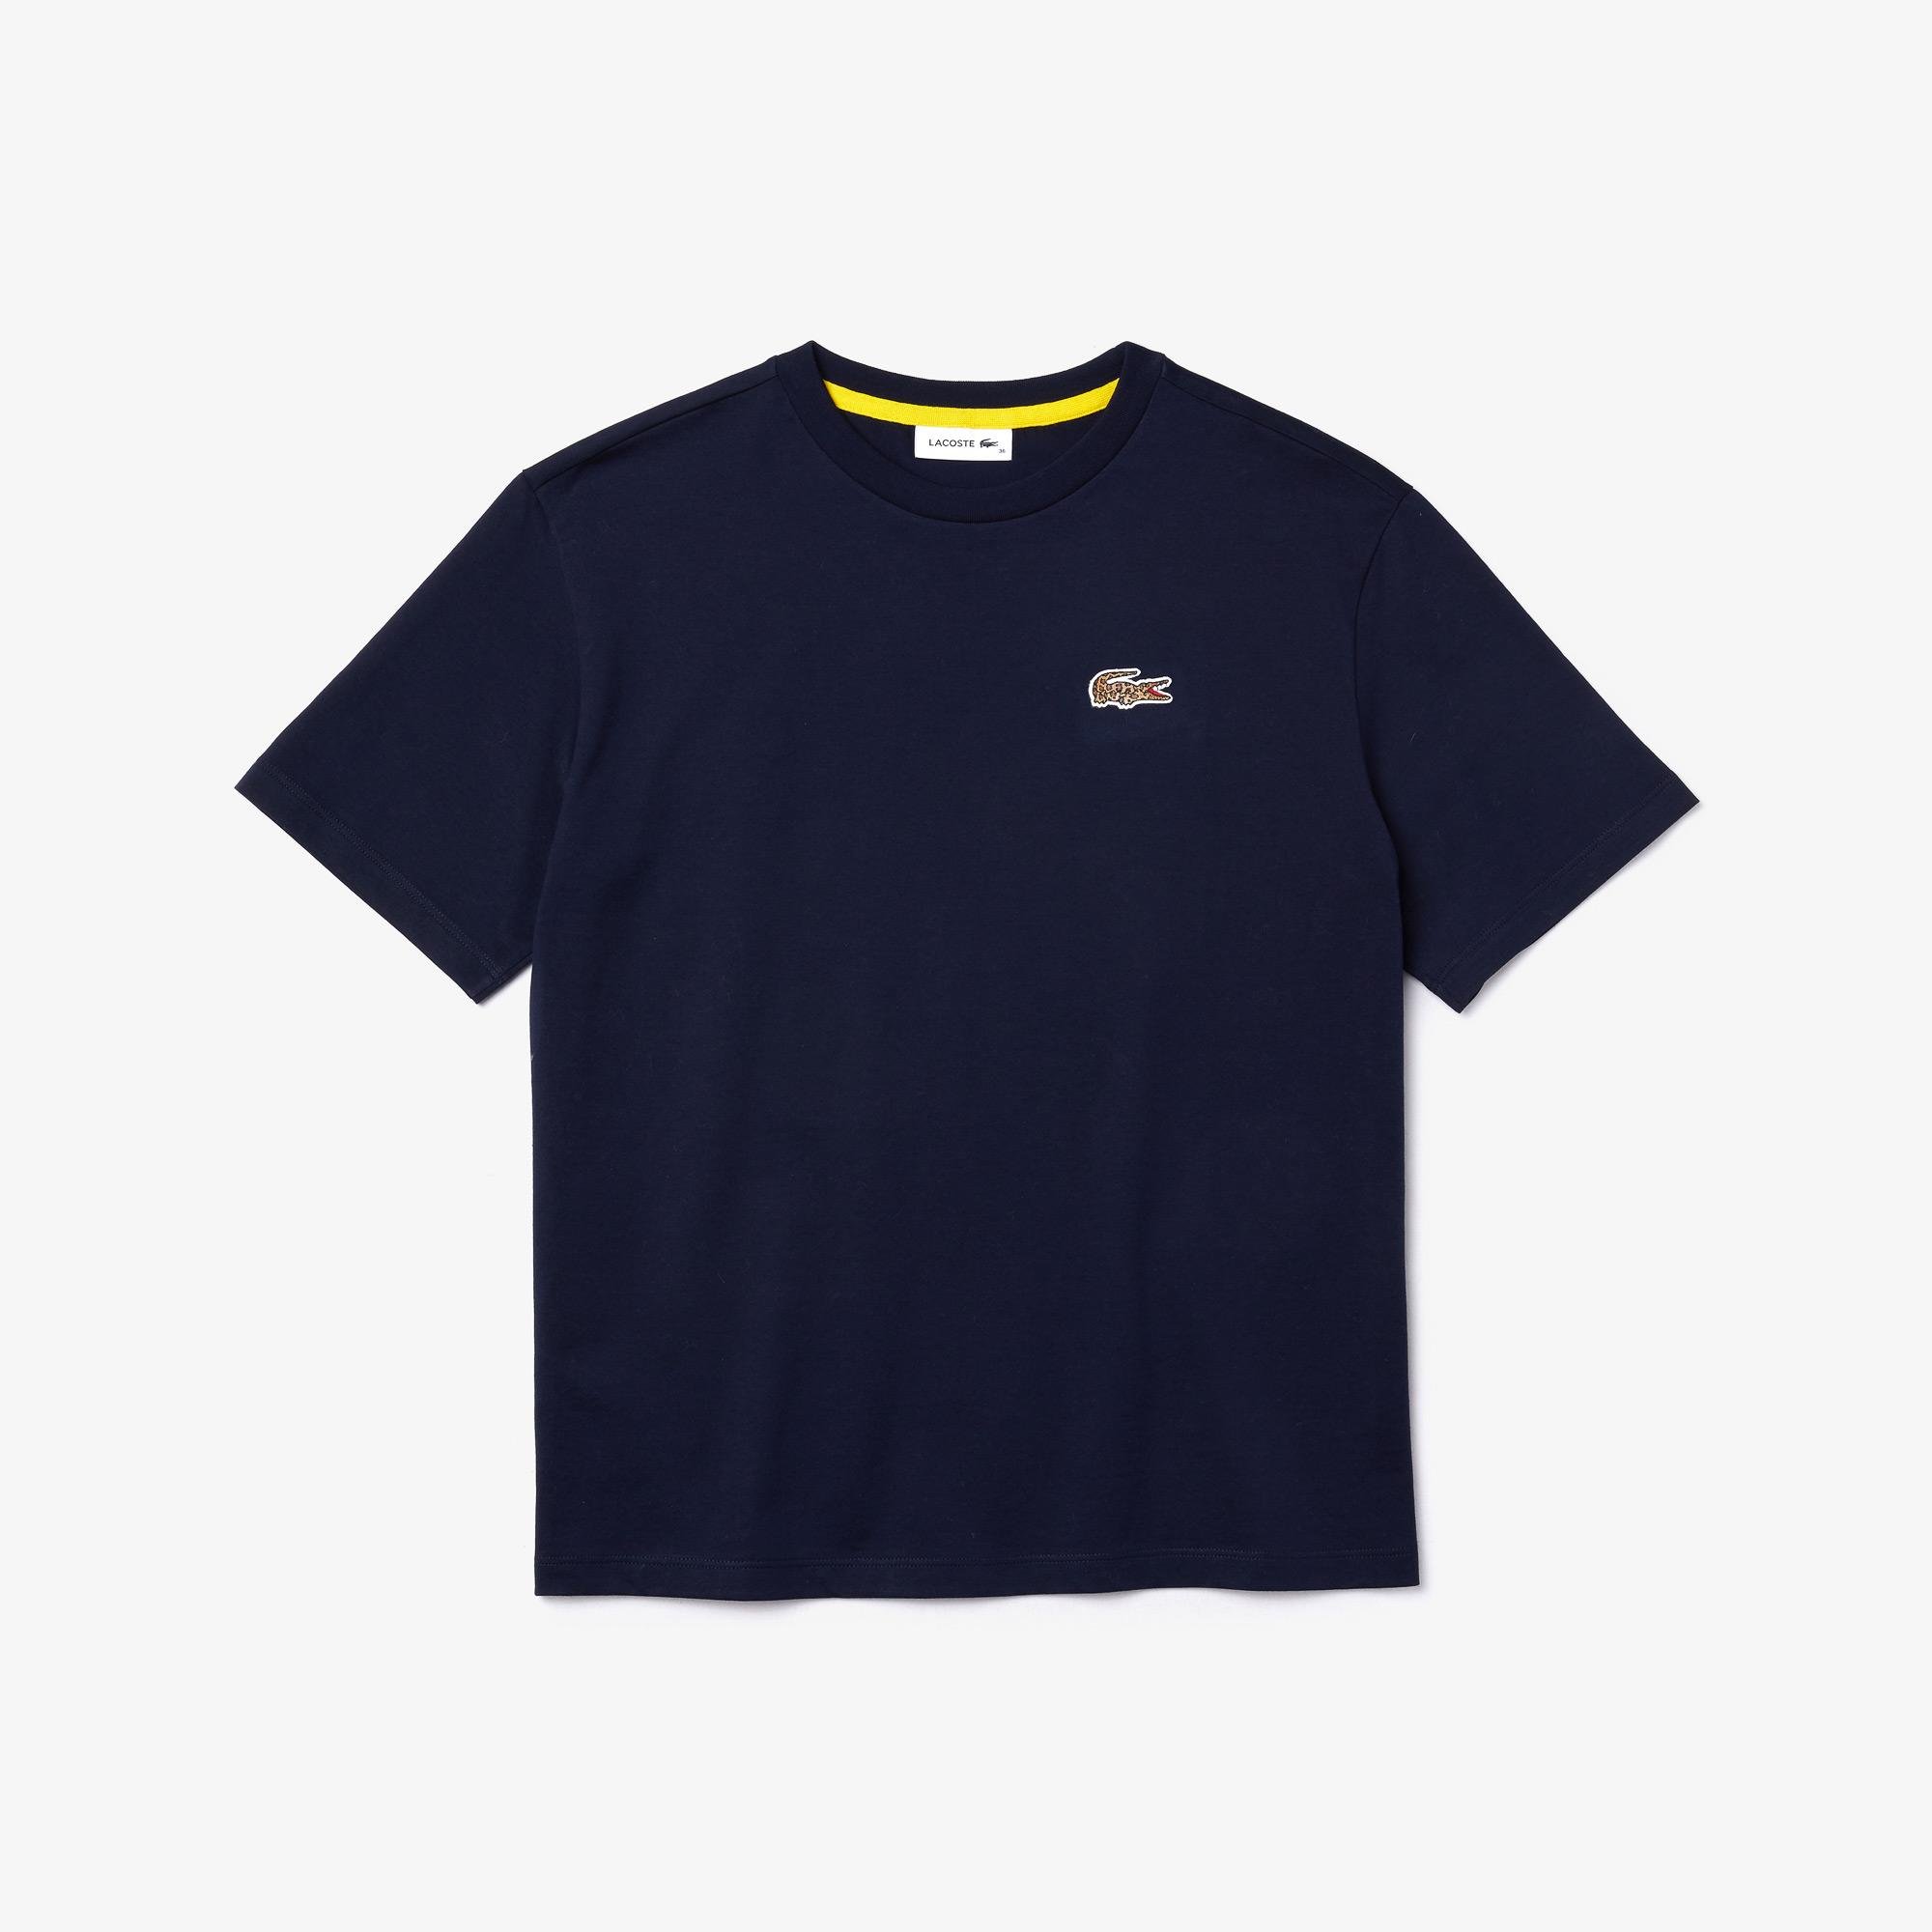 Lacoste Women’s x National Geographic Cotton T-shirt TF5902 6UD | Lacoste